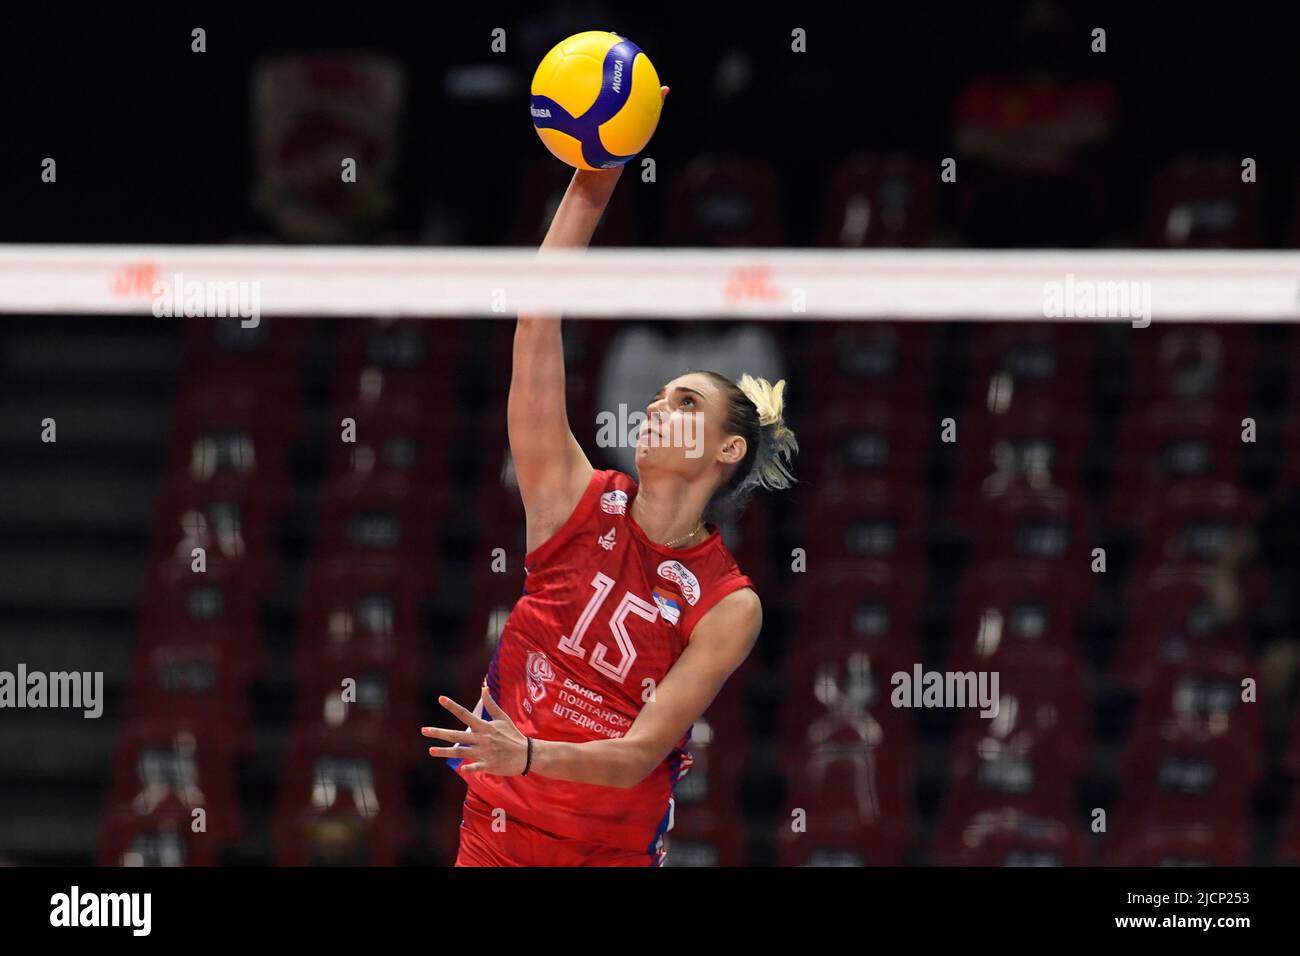 Brasilia, Brazil. 14th June, 2022. DF - Brasilia - 06/14/2022 - WOMEN'S NATIONS VOLLEYBALL LEAGUE SERBIA X ITALY - Serbian player Stevanovic Jovana attacks during a match against Italy at Nilson Nelson Gymnasium for the Women's Volleyball Nations League 2022. Photo: Mateus Bonomi/AGIF/Sipa USA Credit: Sipa USA/Alamy Live News Stock Photo